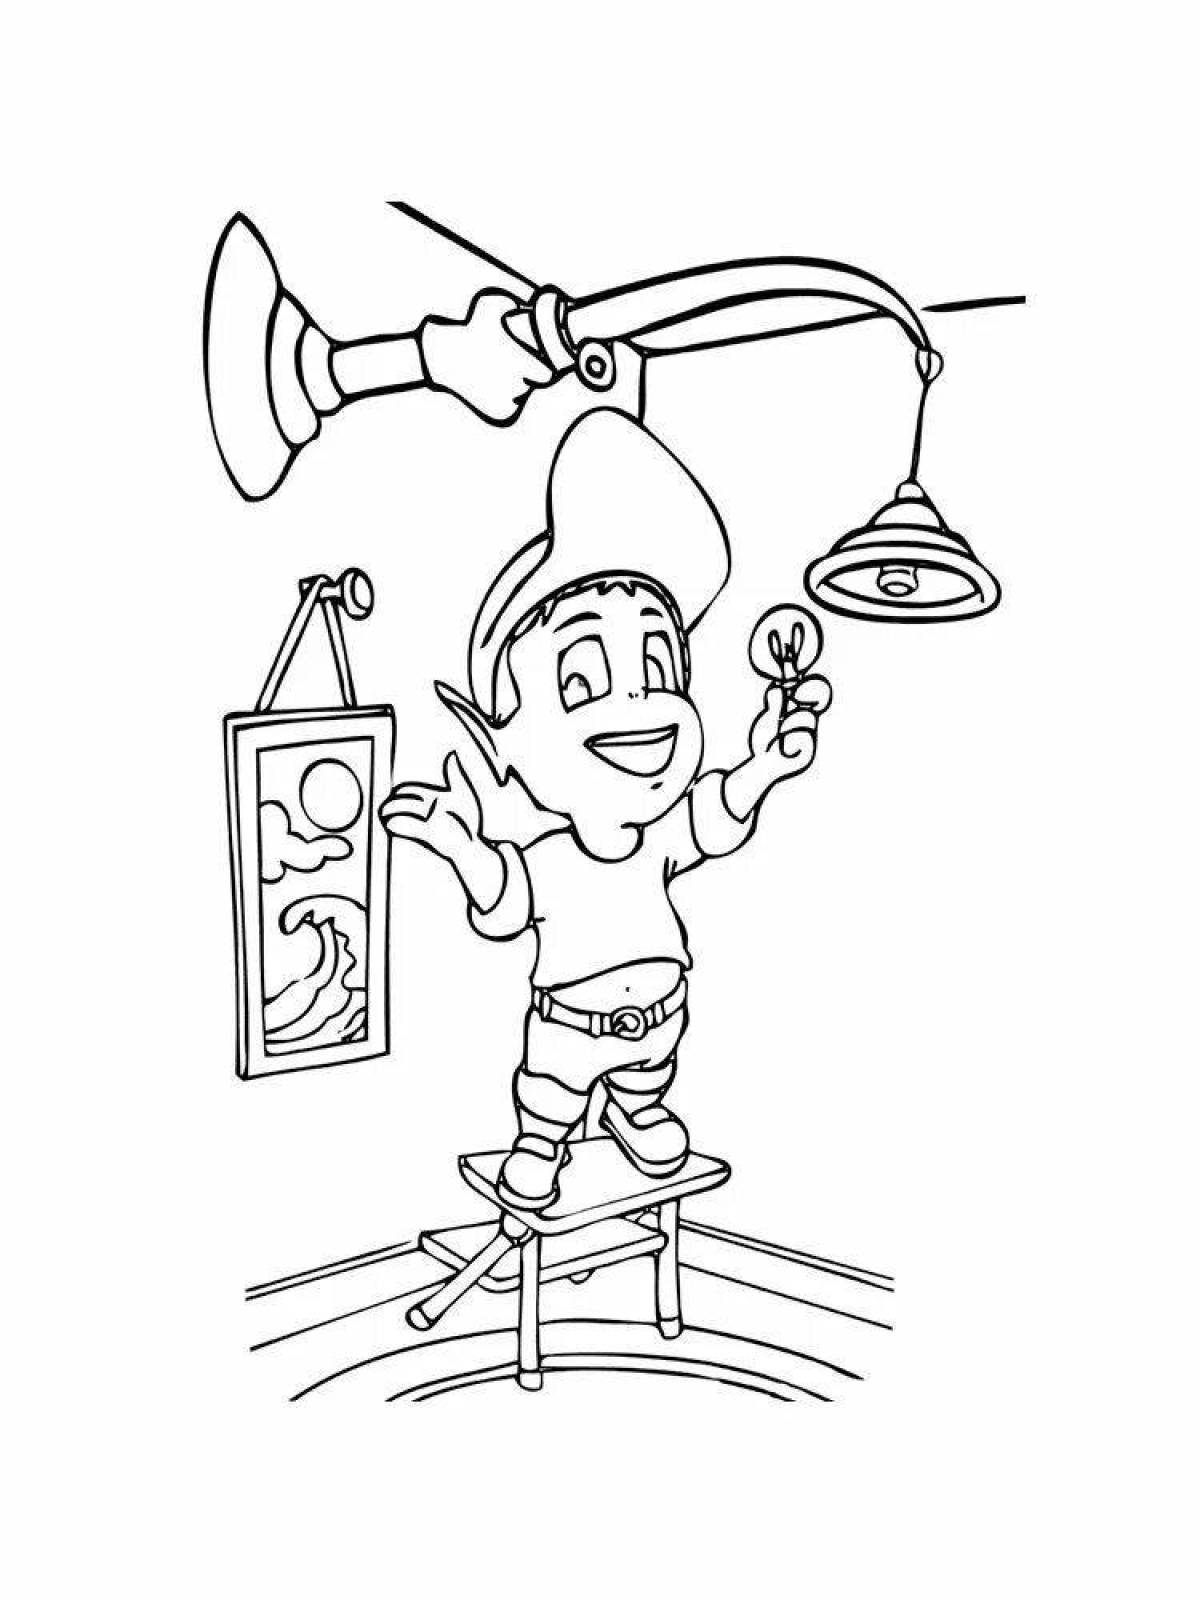 Electrician coloring page